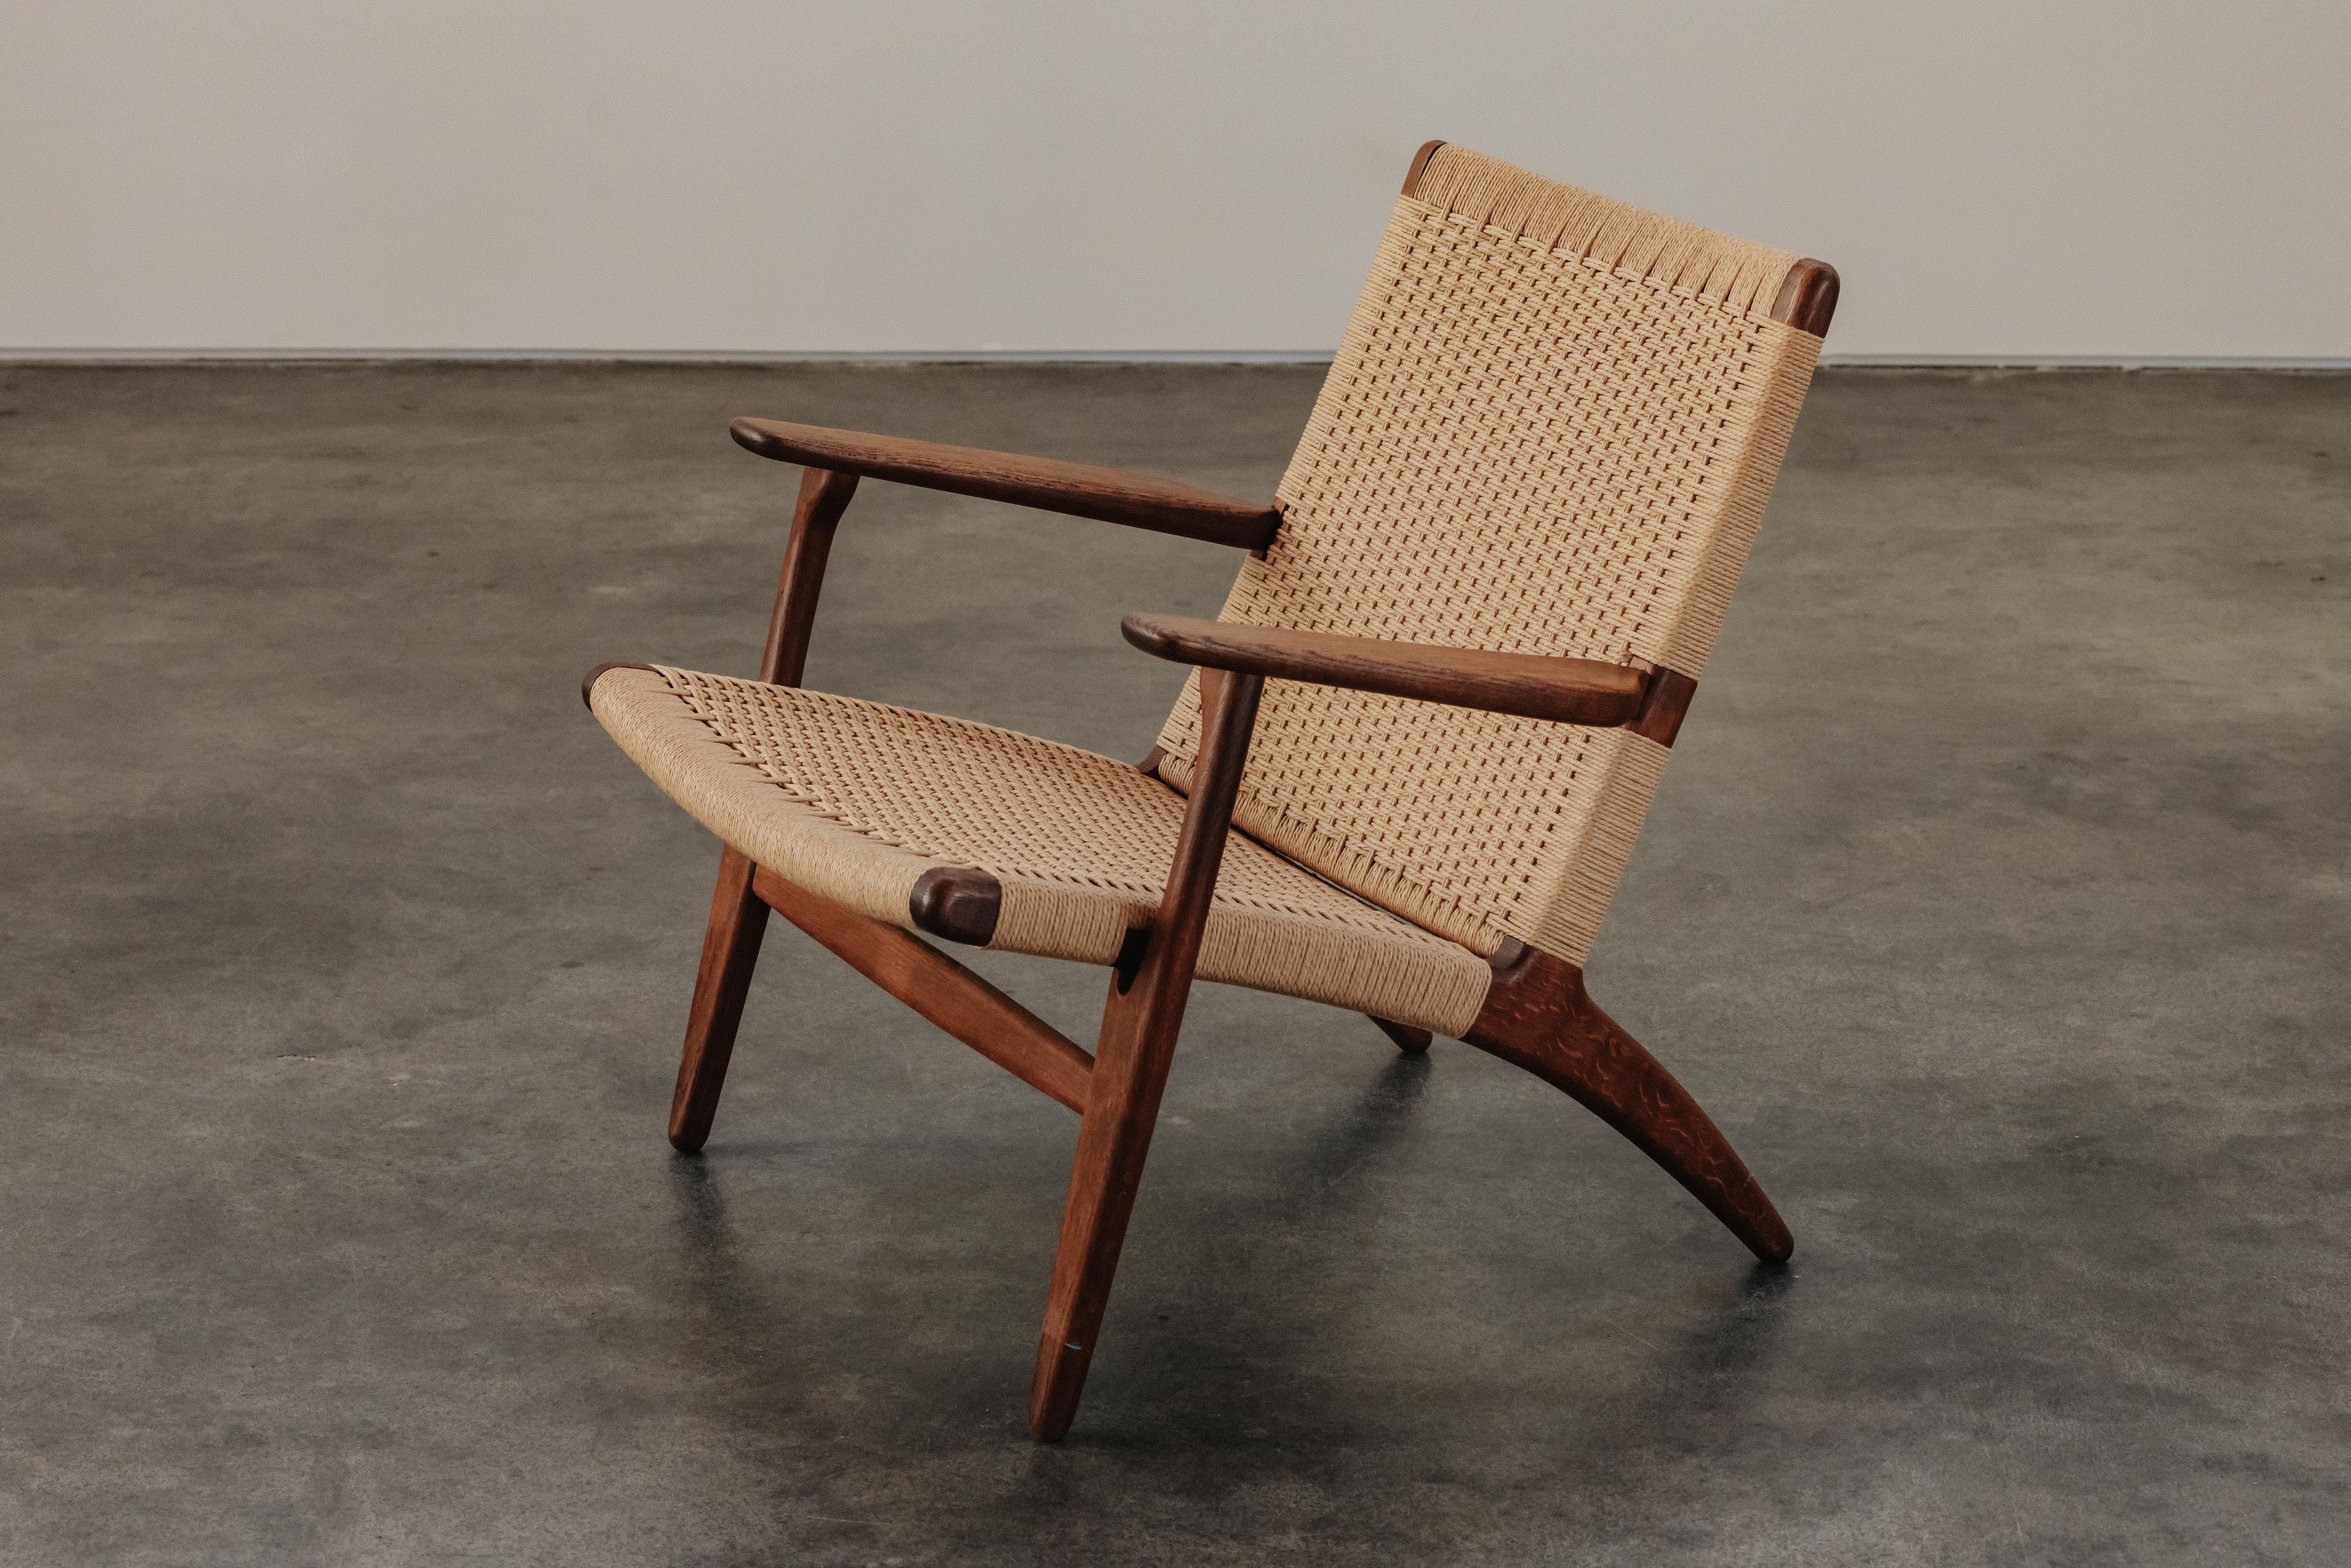 Vintage Hans Wegner Lounge Chair, Model CH25, From Denmark 1970s In Good Condition For Sale In Nashville, TN